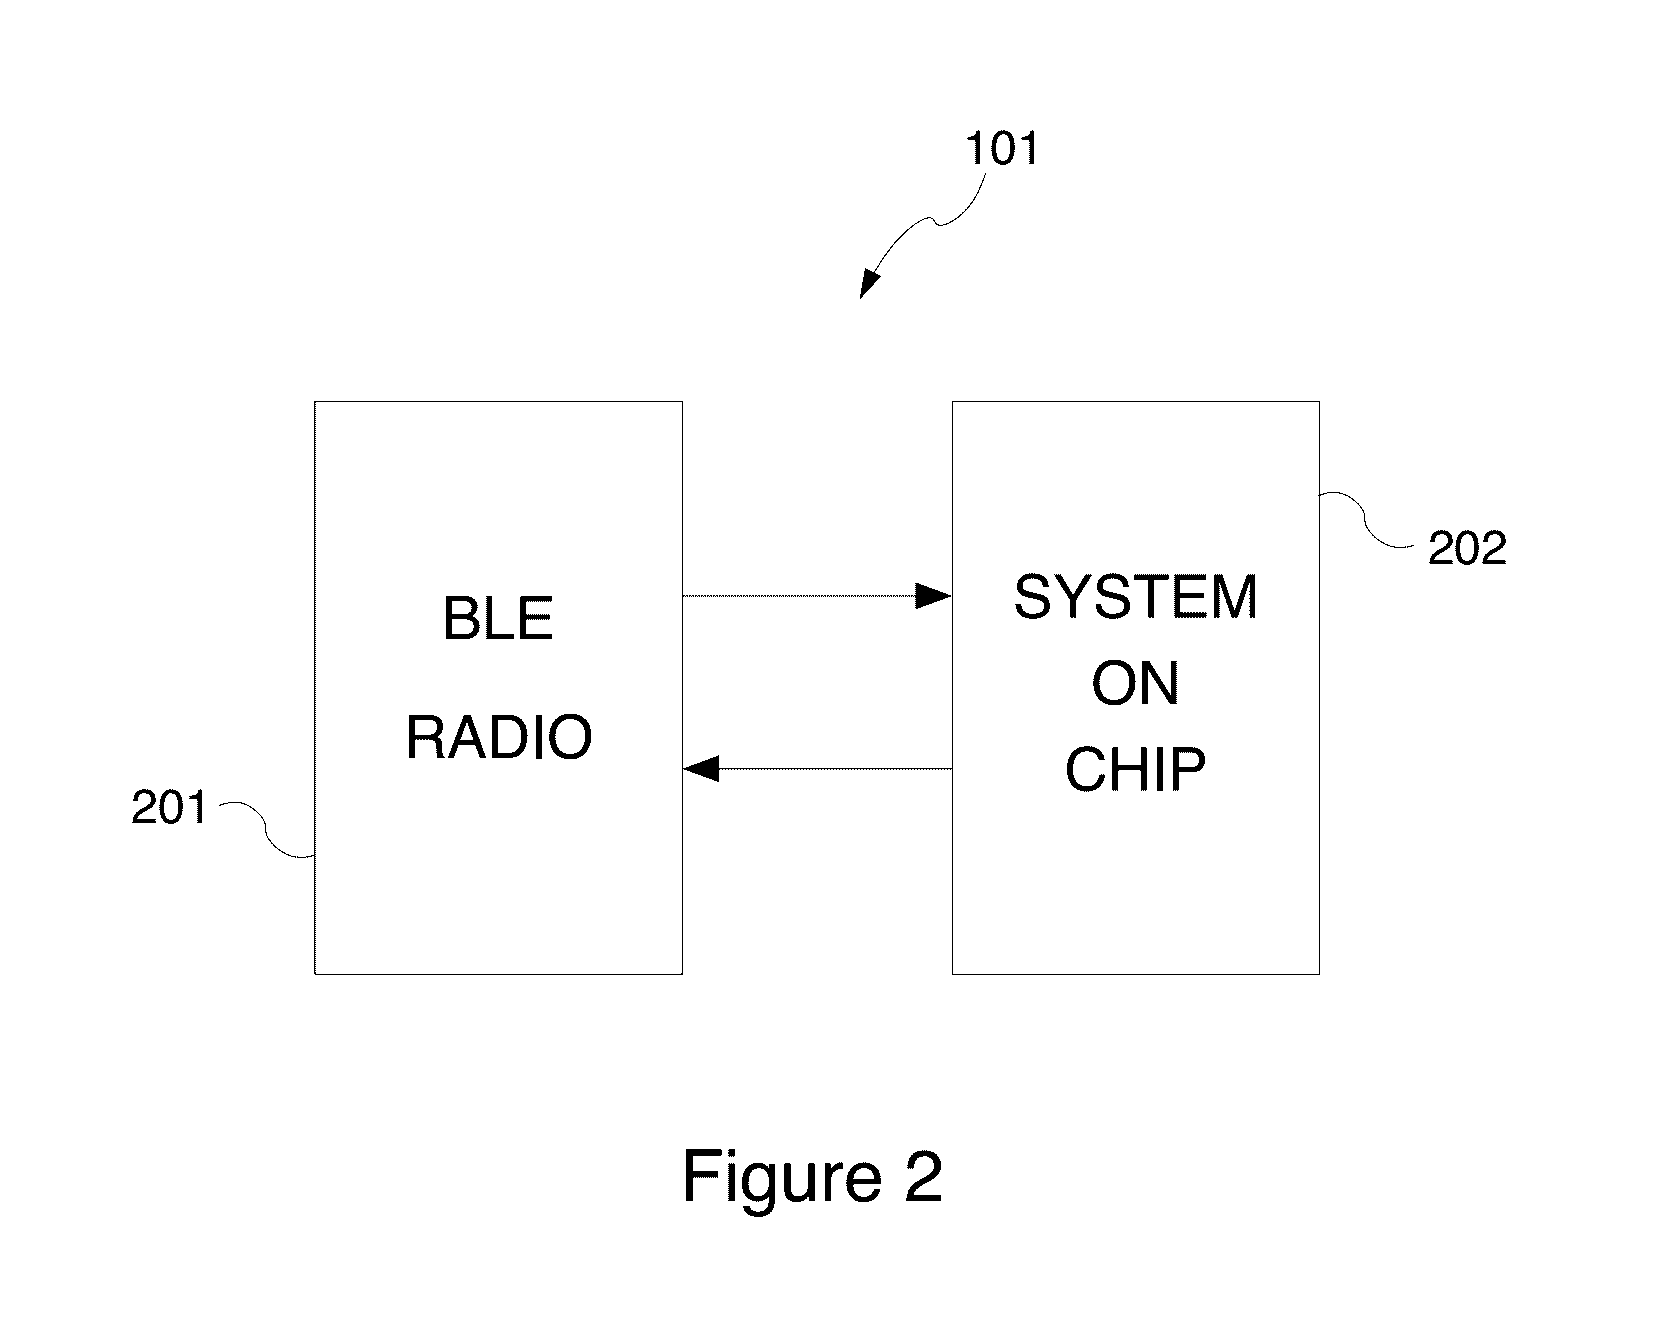 Systems and methods for mobile device location verification using beacons